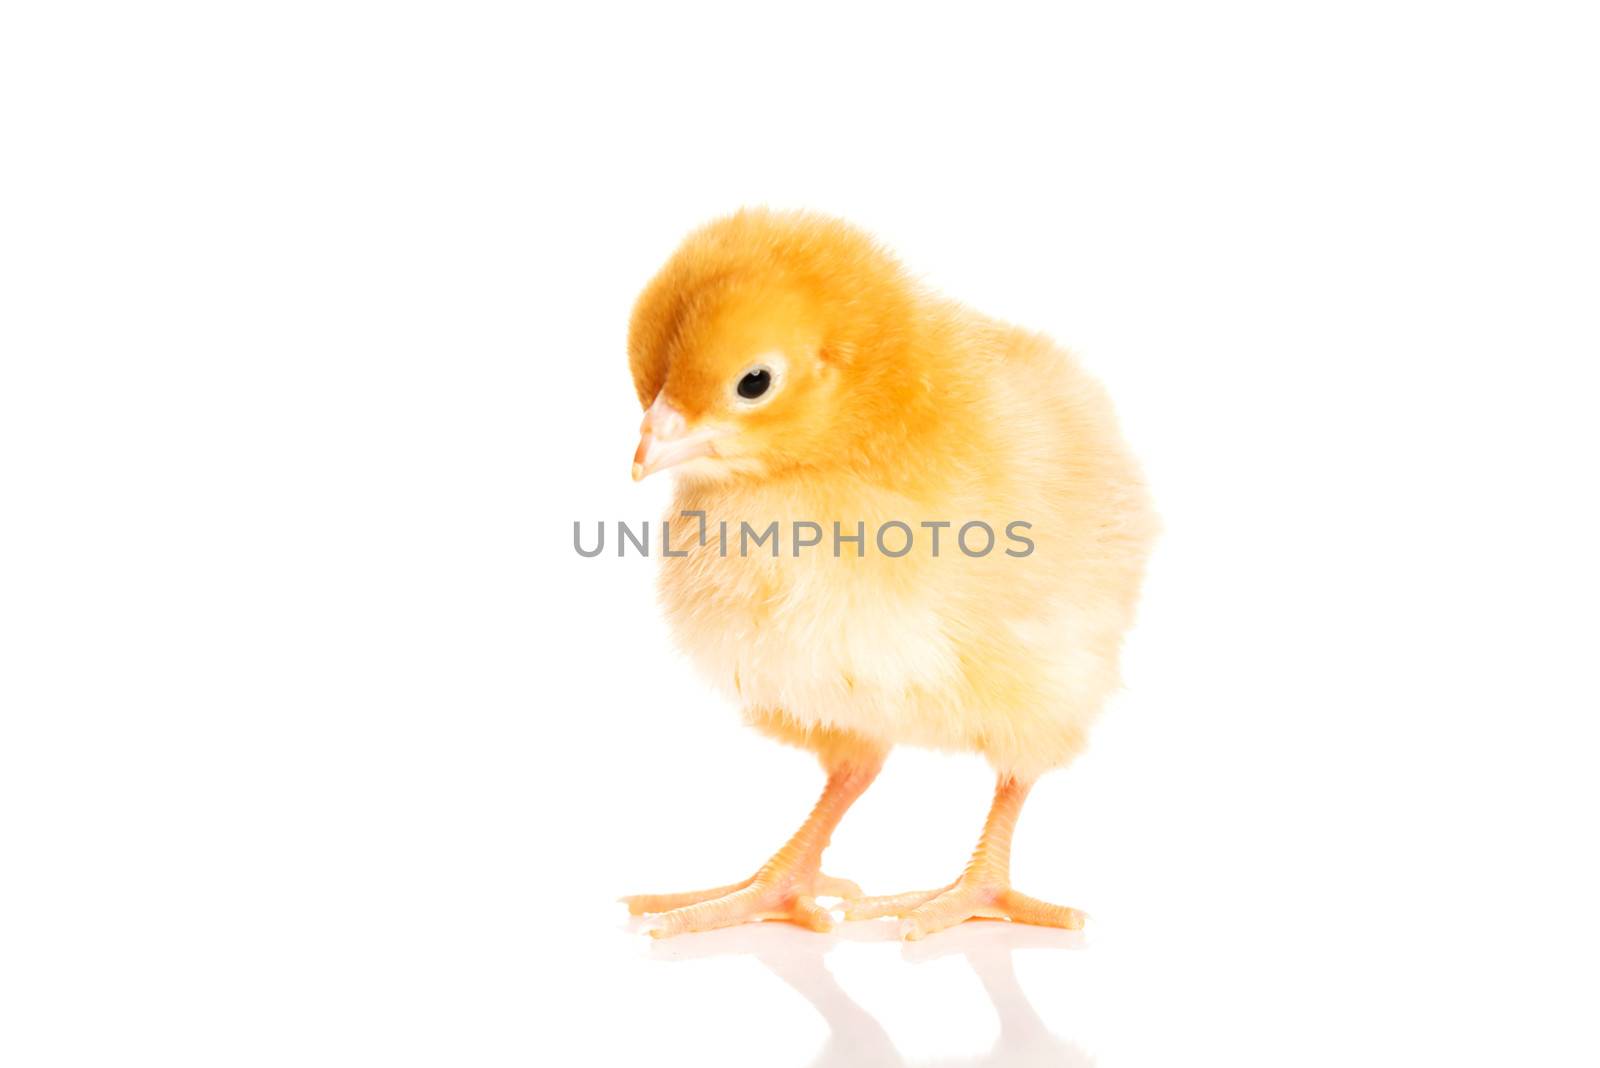 Small yellow Easter chick. Isolated on white.